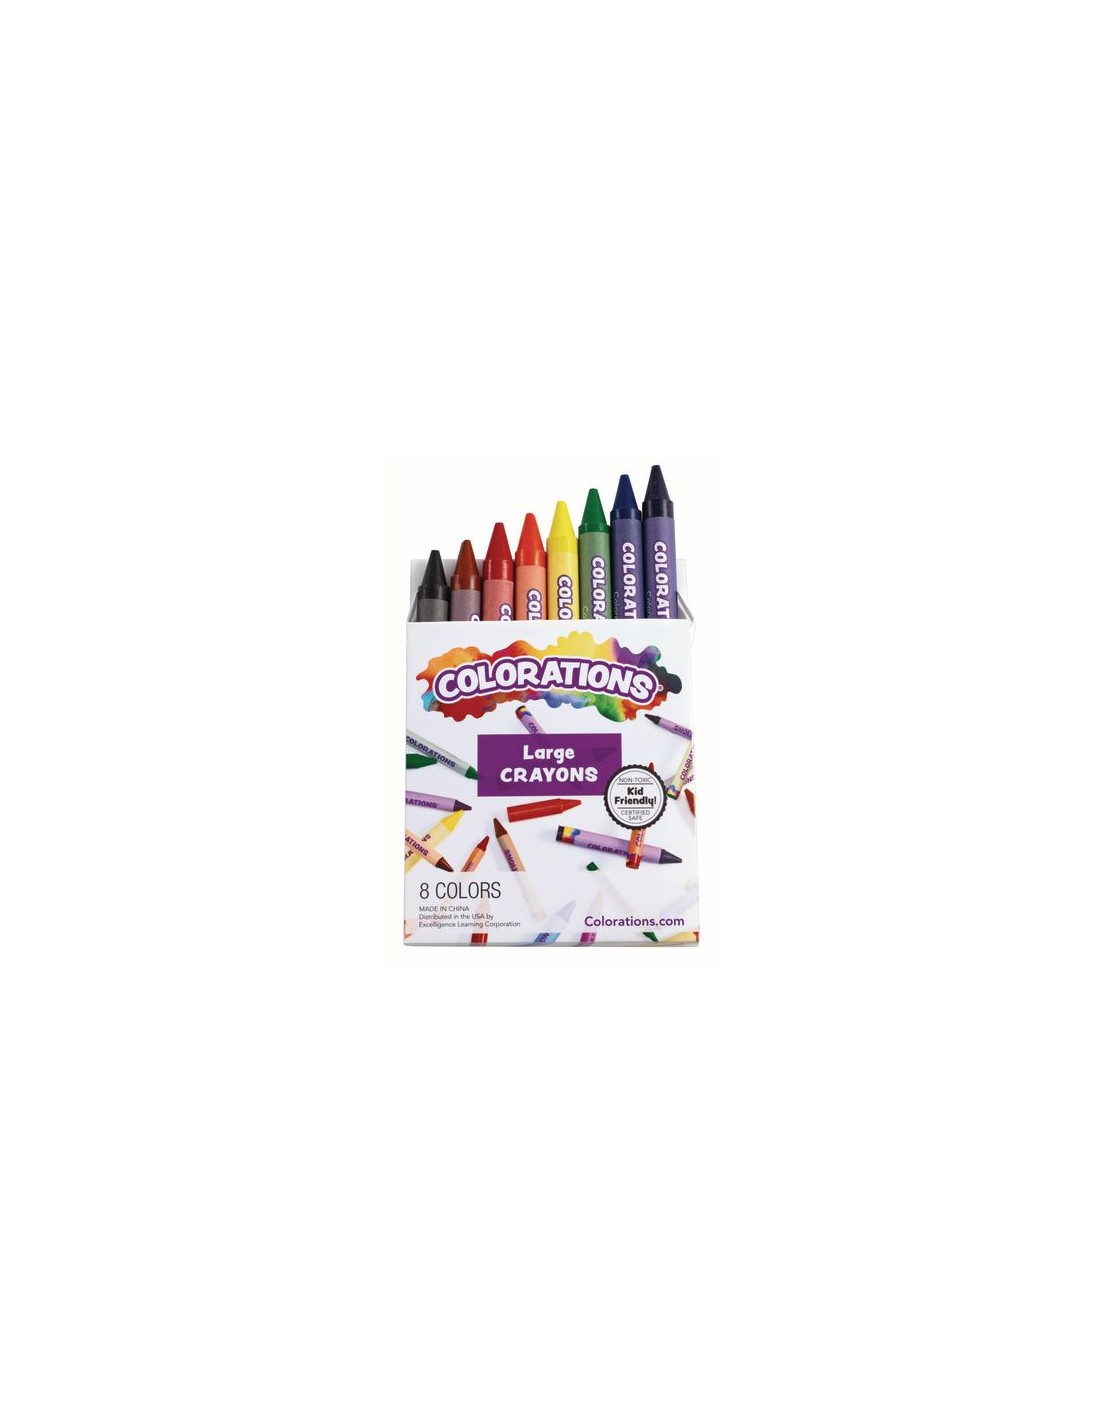 Colorations Large Crayons - Set of 8